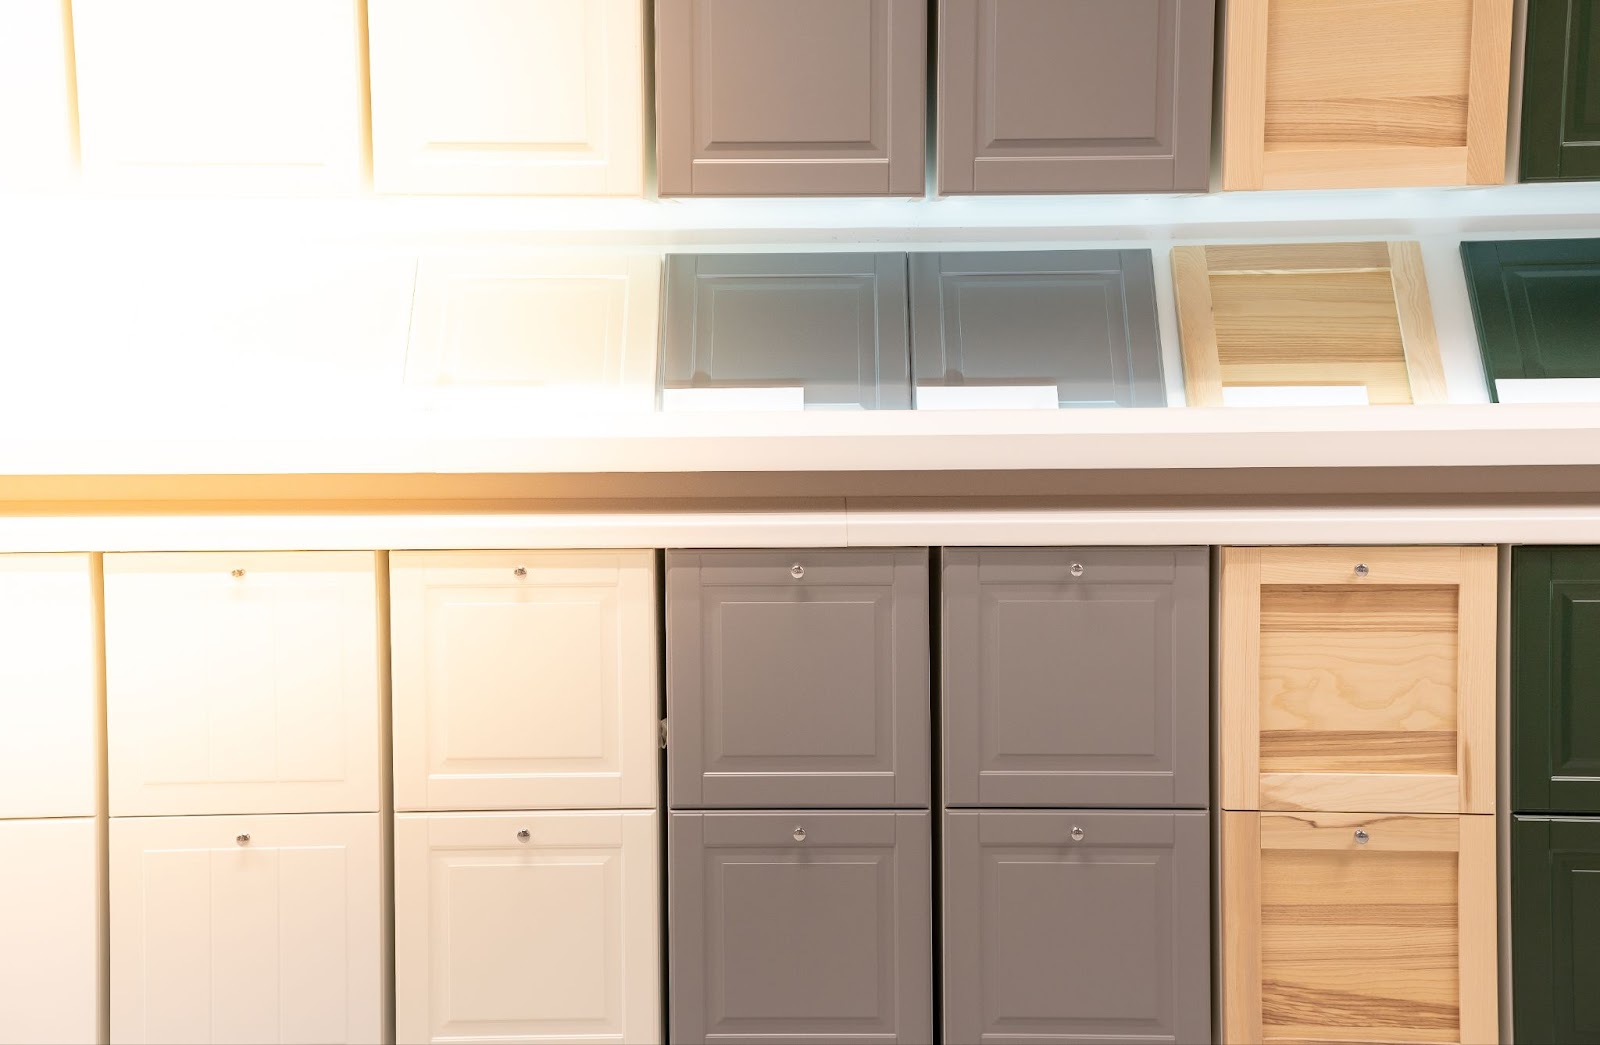 Explore cabinets in various colors and sizes in Utah, showcasing modern cabinetry design